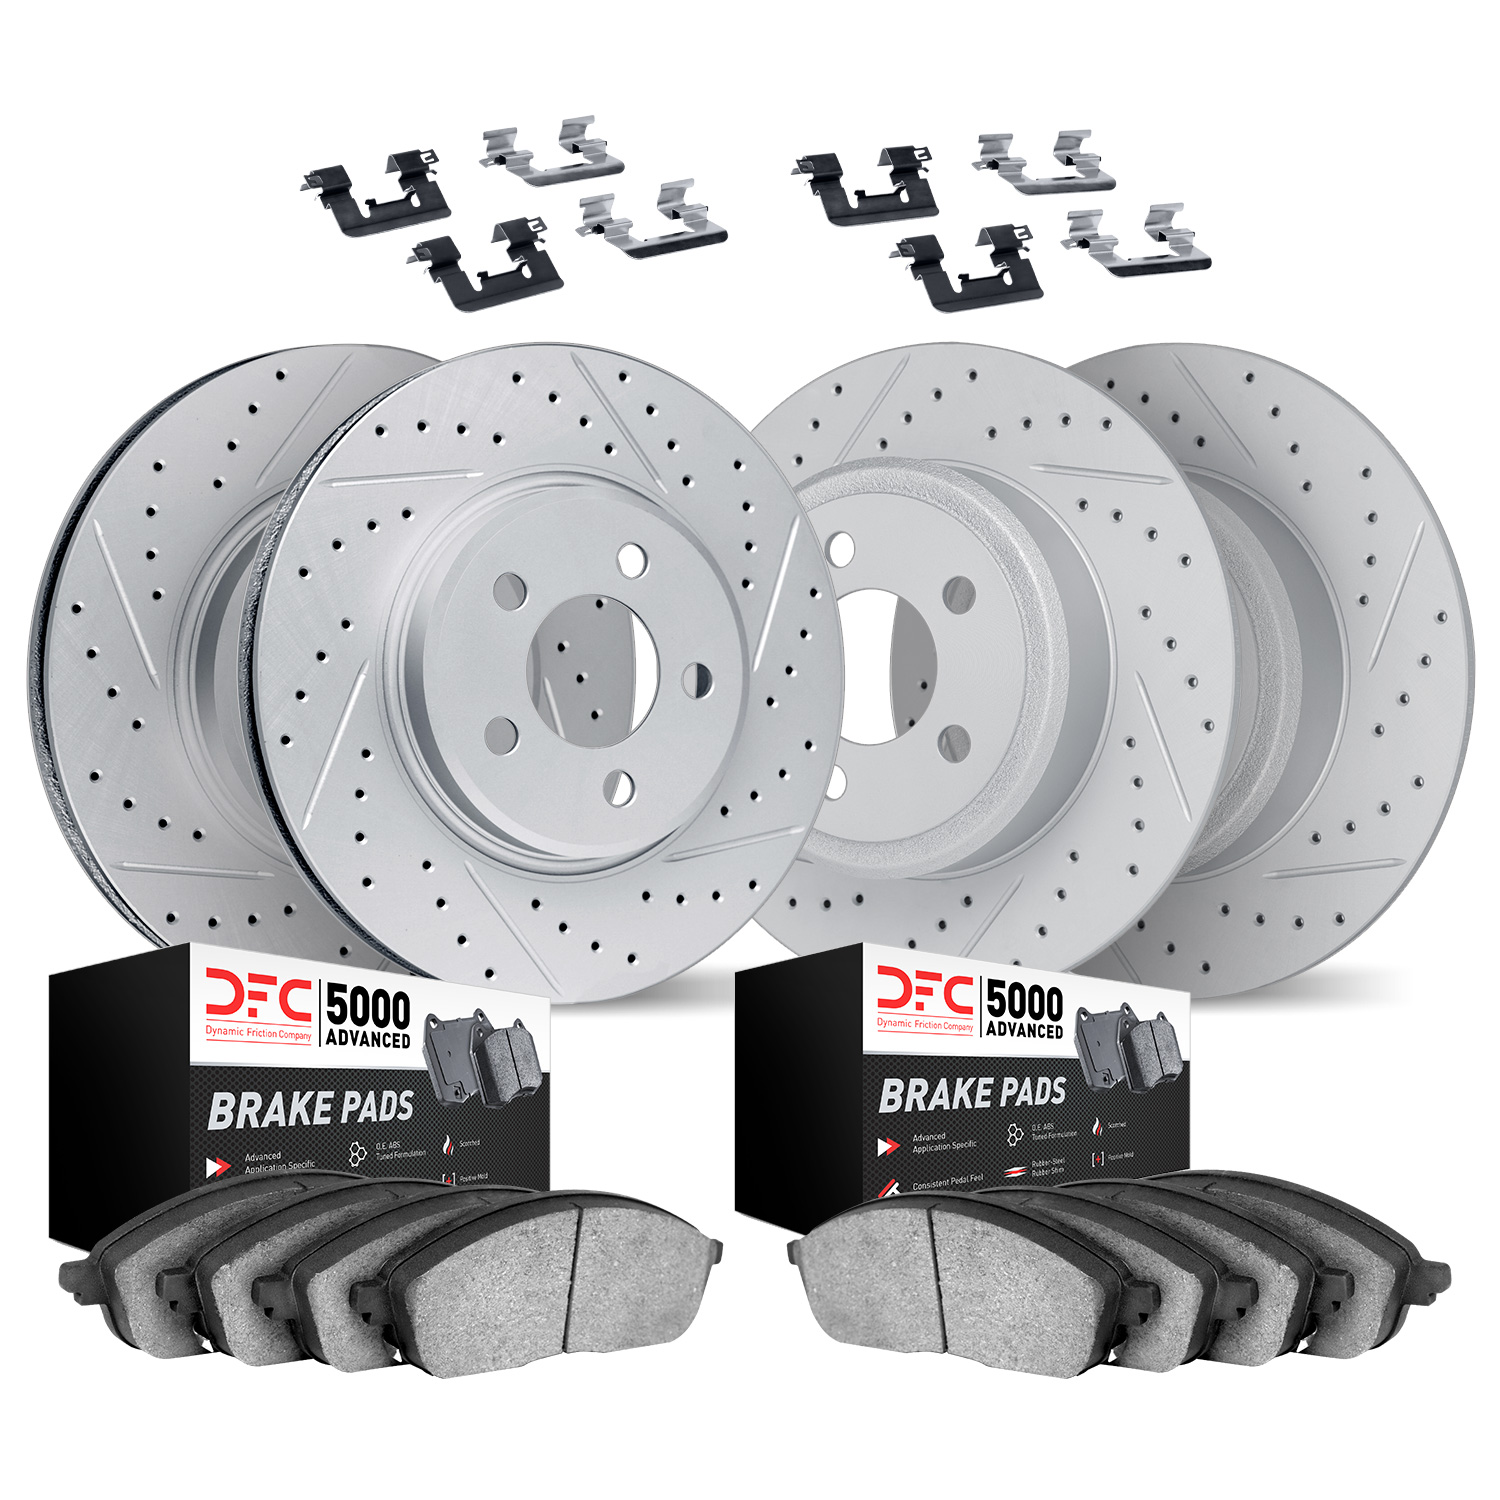 2514-47298 Geoperformance Drilled/Slotted Rotors w/5000 Advanced Brake Pads Kit & Hardware, 2005-2009 GM, Position: Front and Re